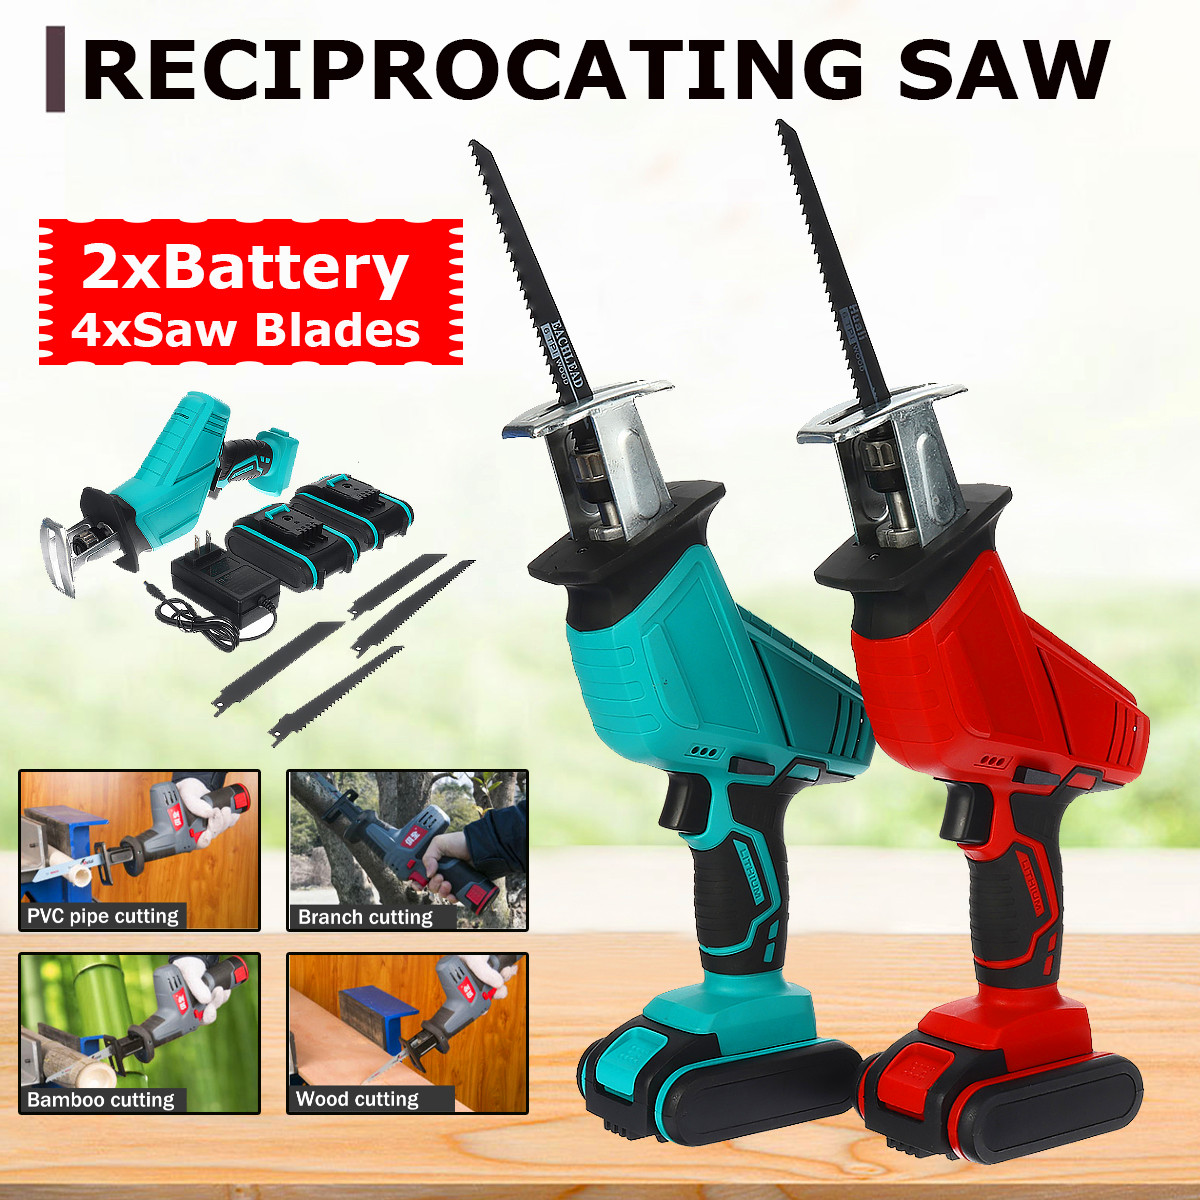 3000rpm-4000mAh-Electric-Saw-Cordless-Rechargeable-Handheld-Reciprocating-Saw-Wood-Cutter-W-4pcs-Saw-1758398-1